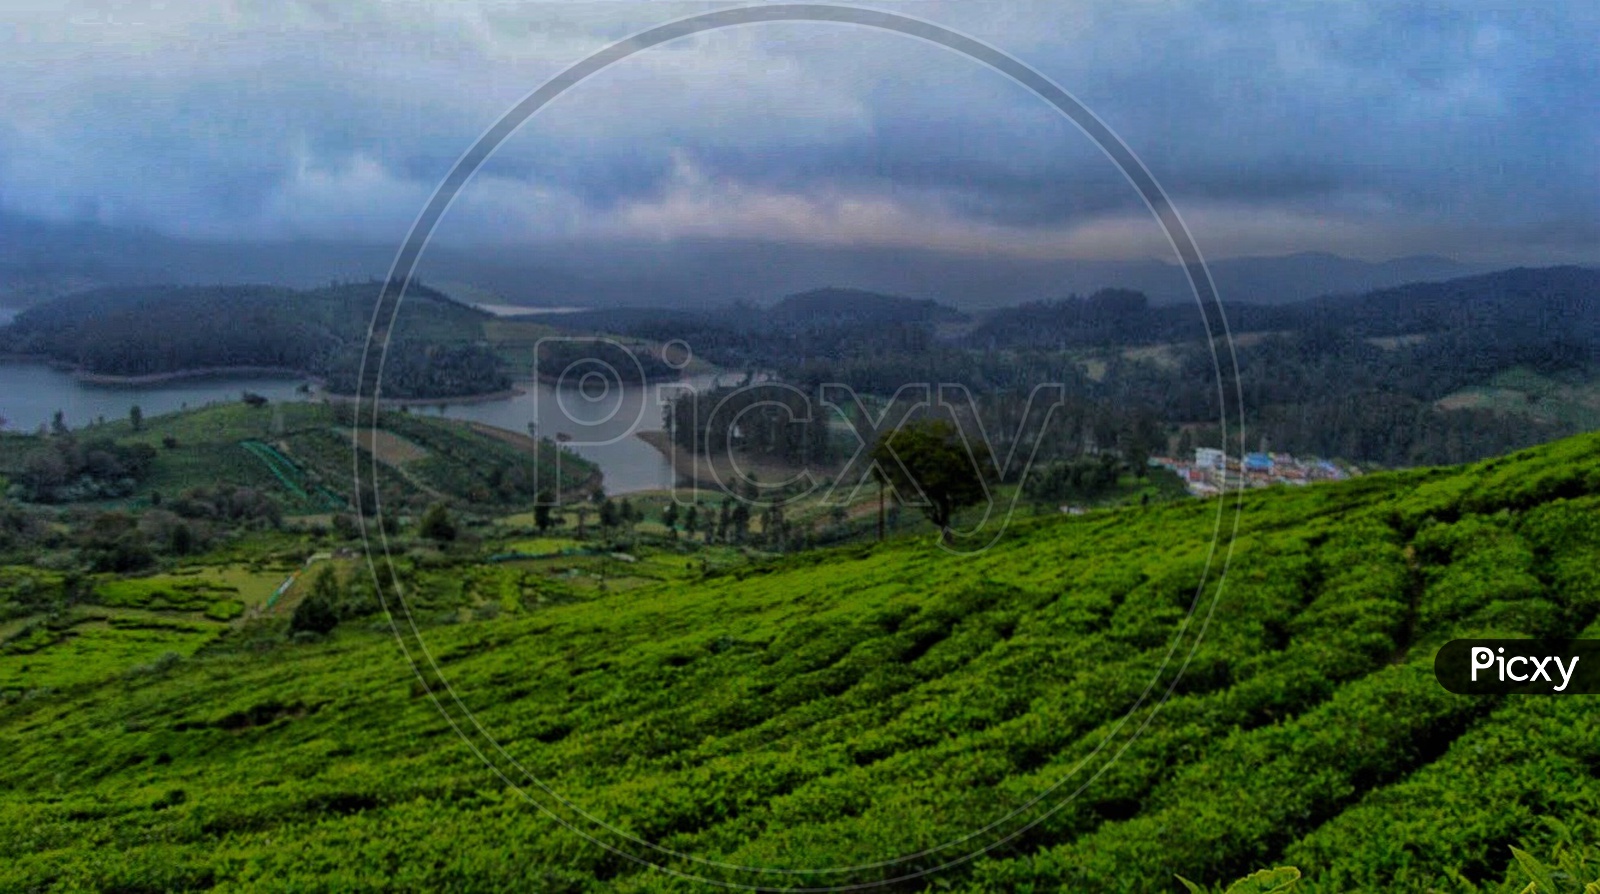 The tea plantations in the foreground and the avalanche lake in the backdrop.